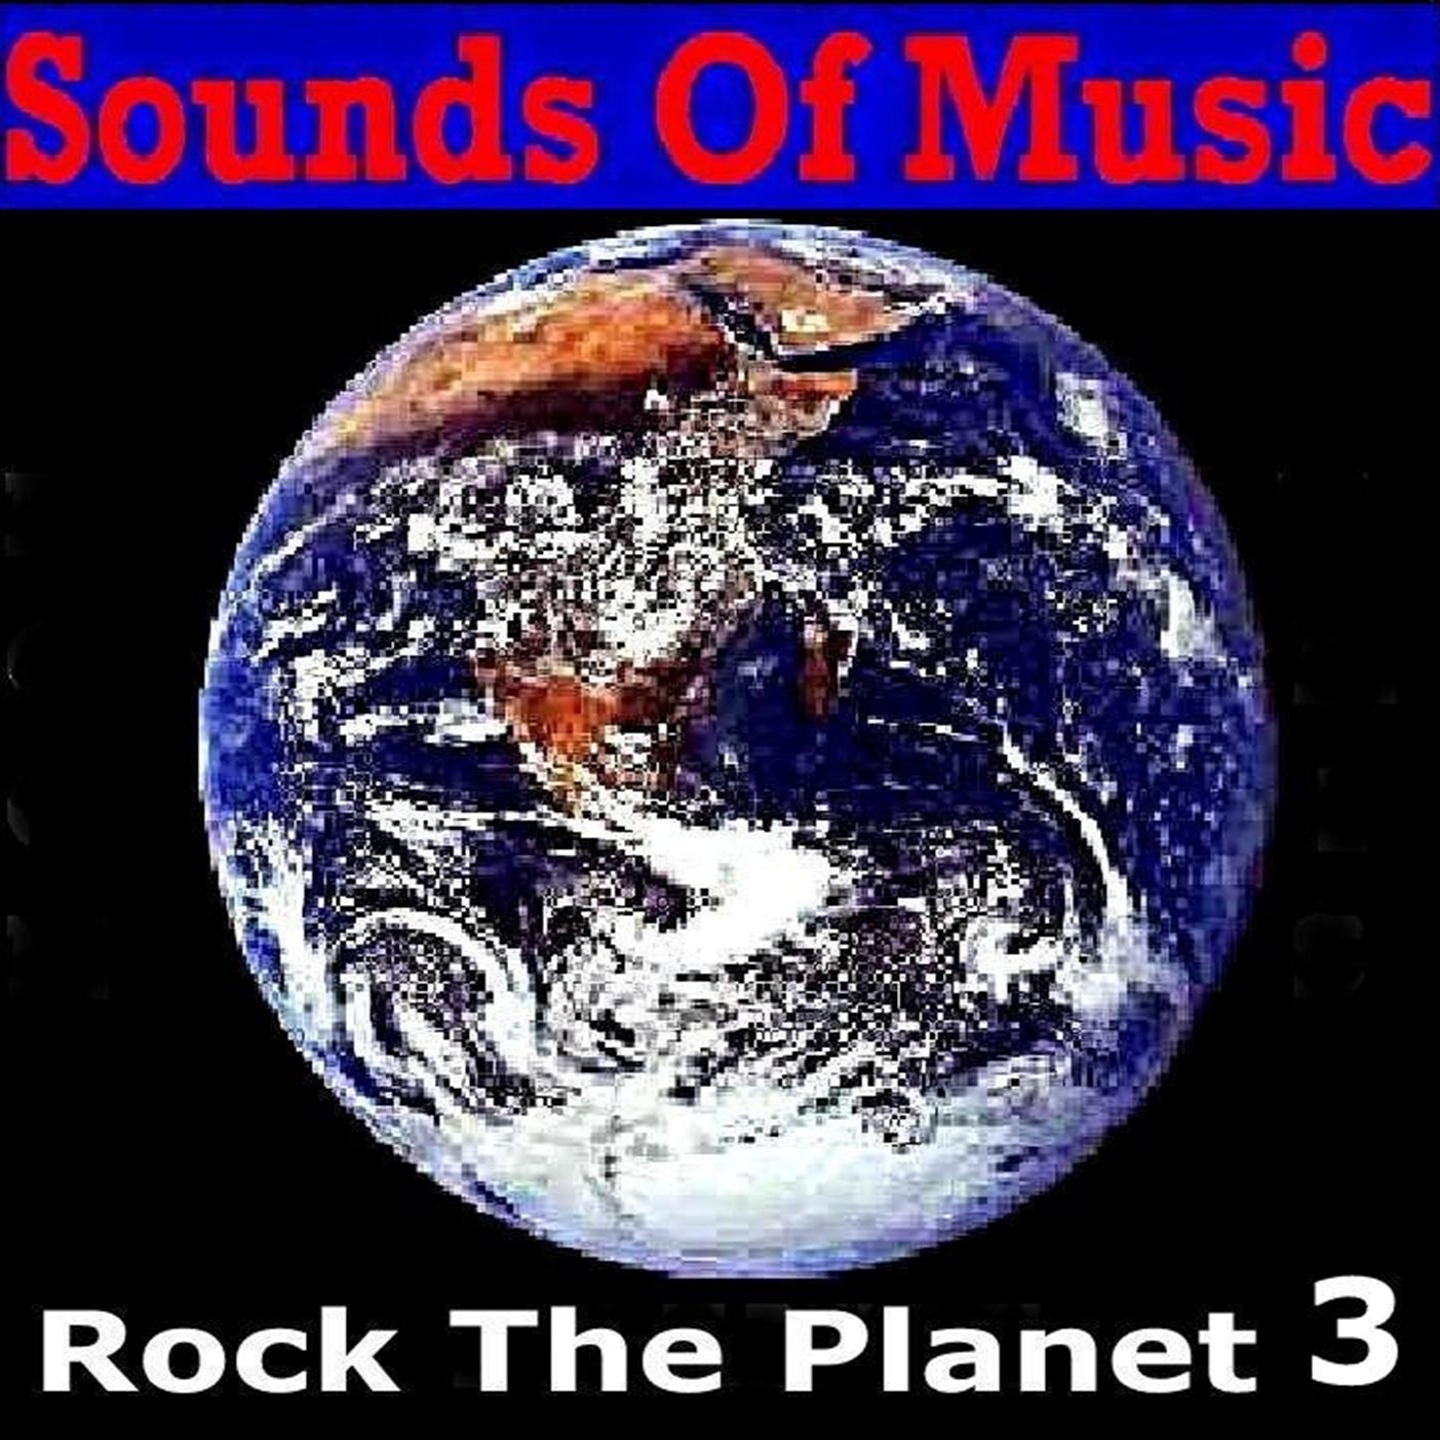 Sounds of Music Presents Rock the Planet, Vol. 3